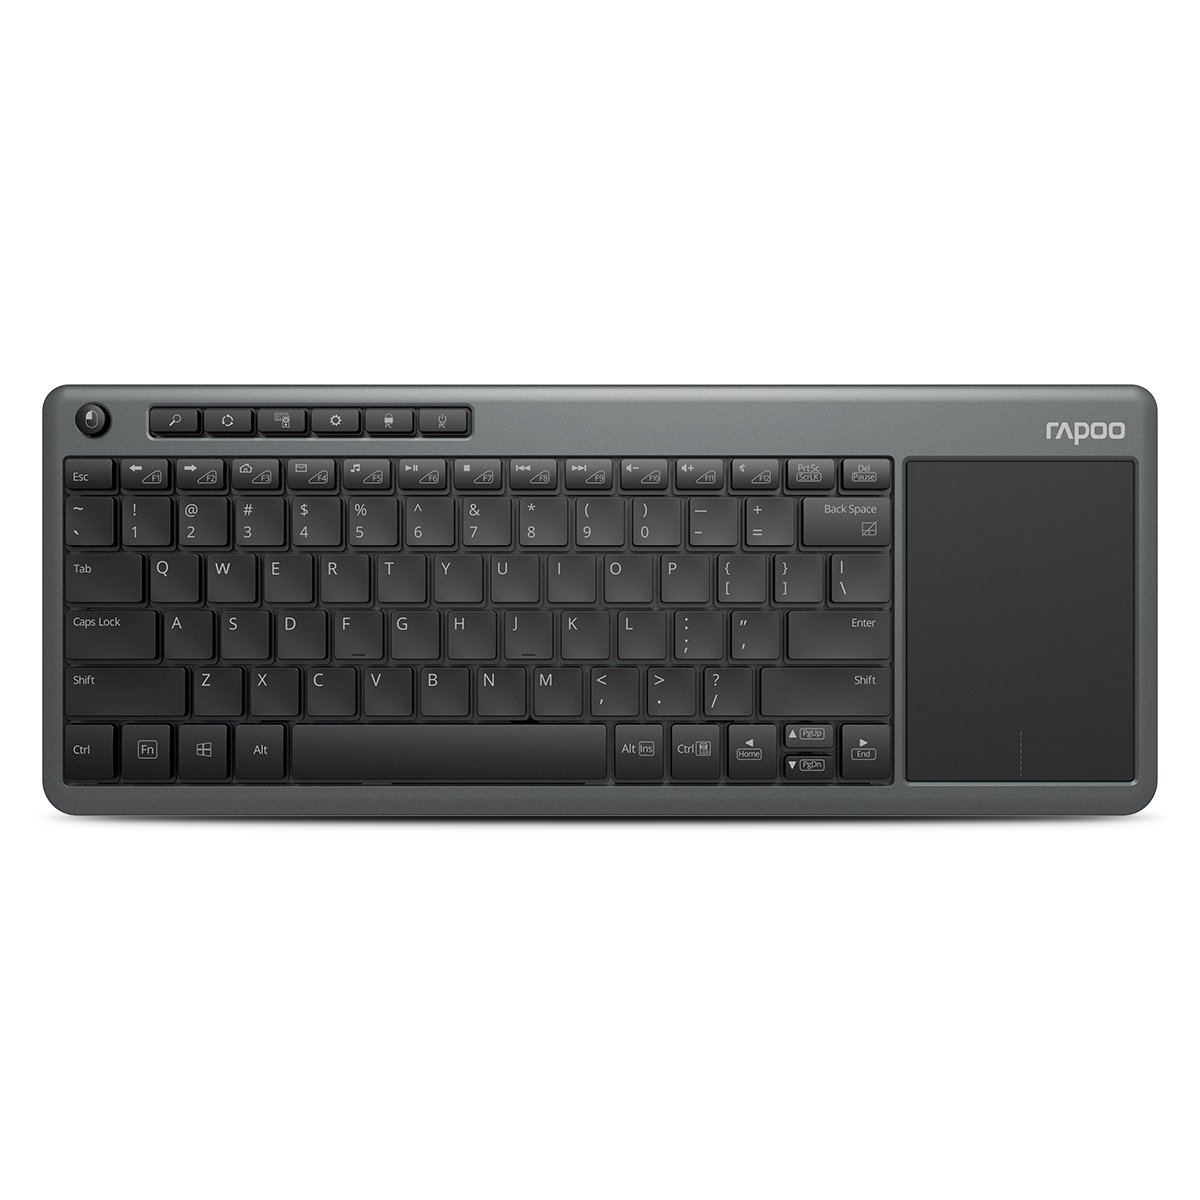 K2600 Wireless Keyboard with Touchpad